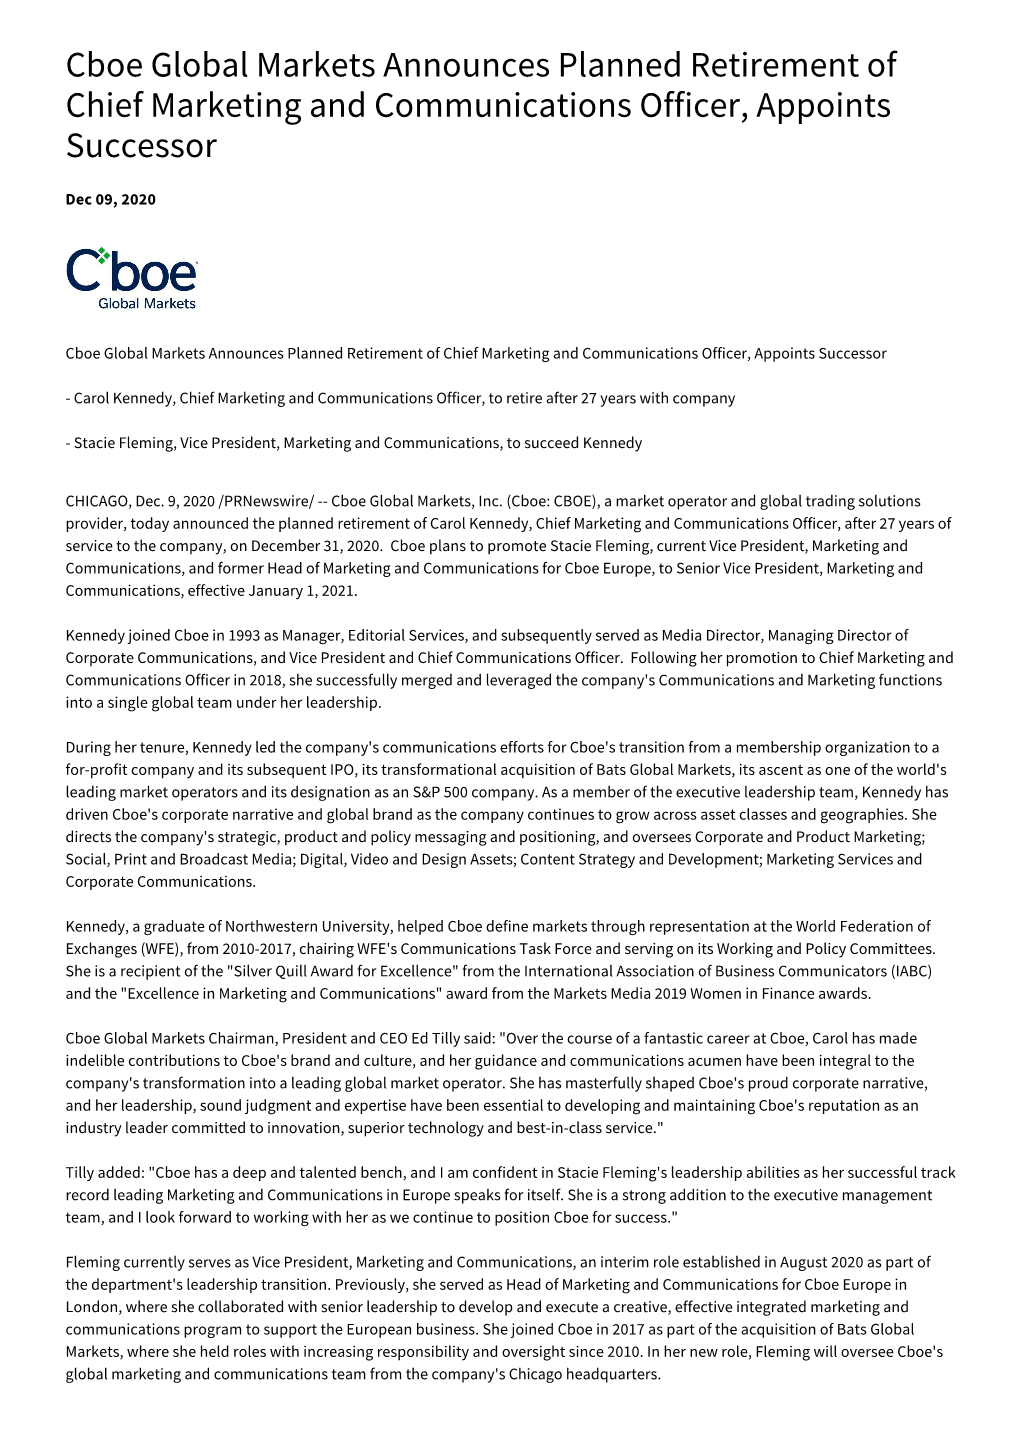 Cboe Global Markets Announces Planned Retirement of Chief Marketing and Communications Officer, Appoints Successor